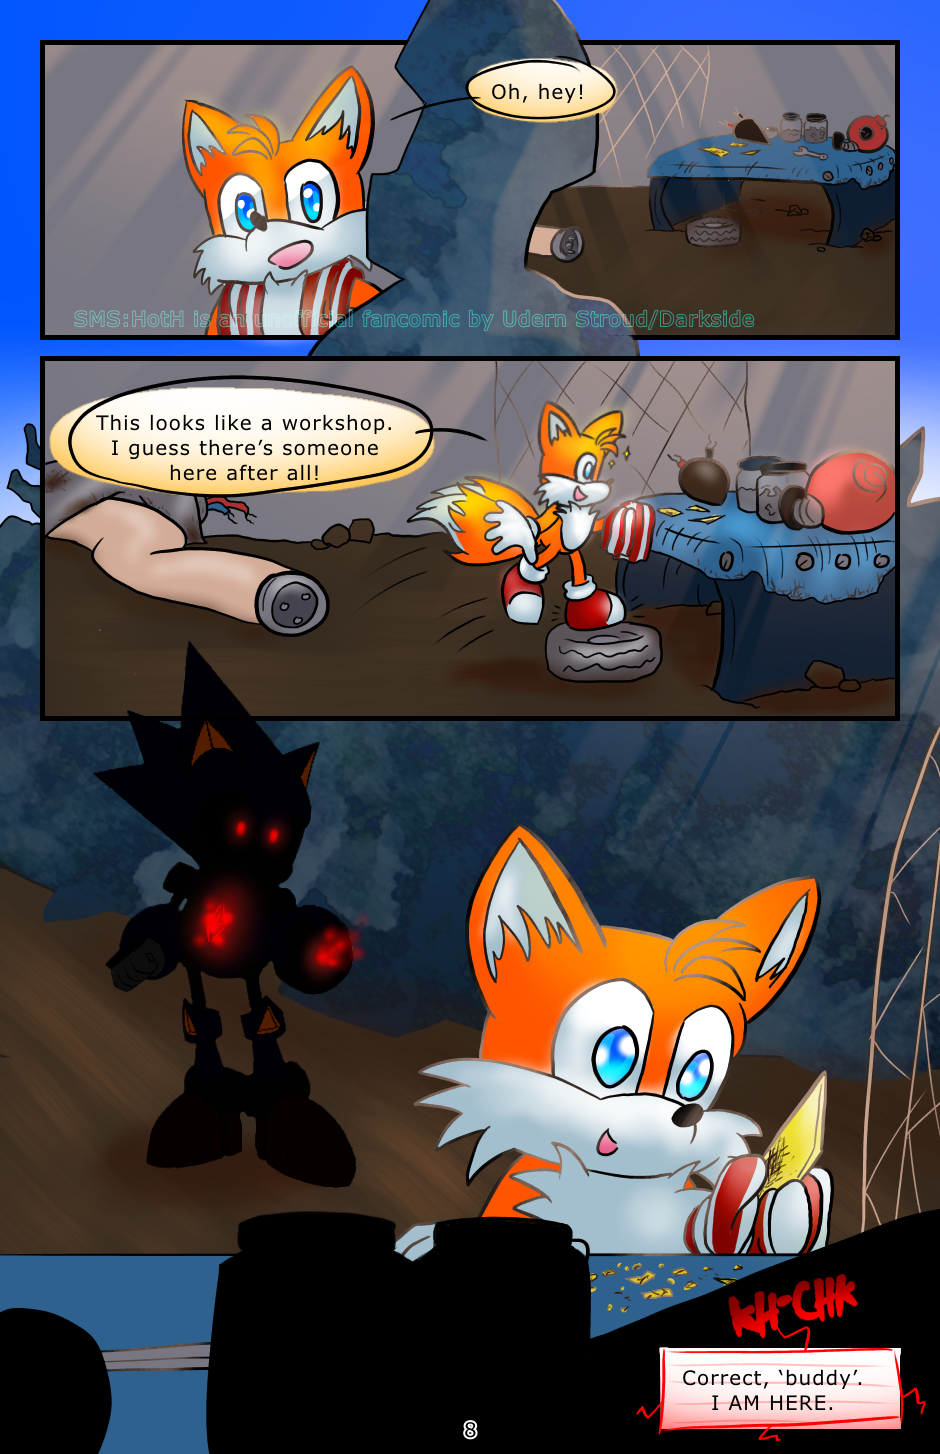 Sonic. EXE Cookie & Tails Doll Cookie Introduction - Comic Studio